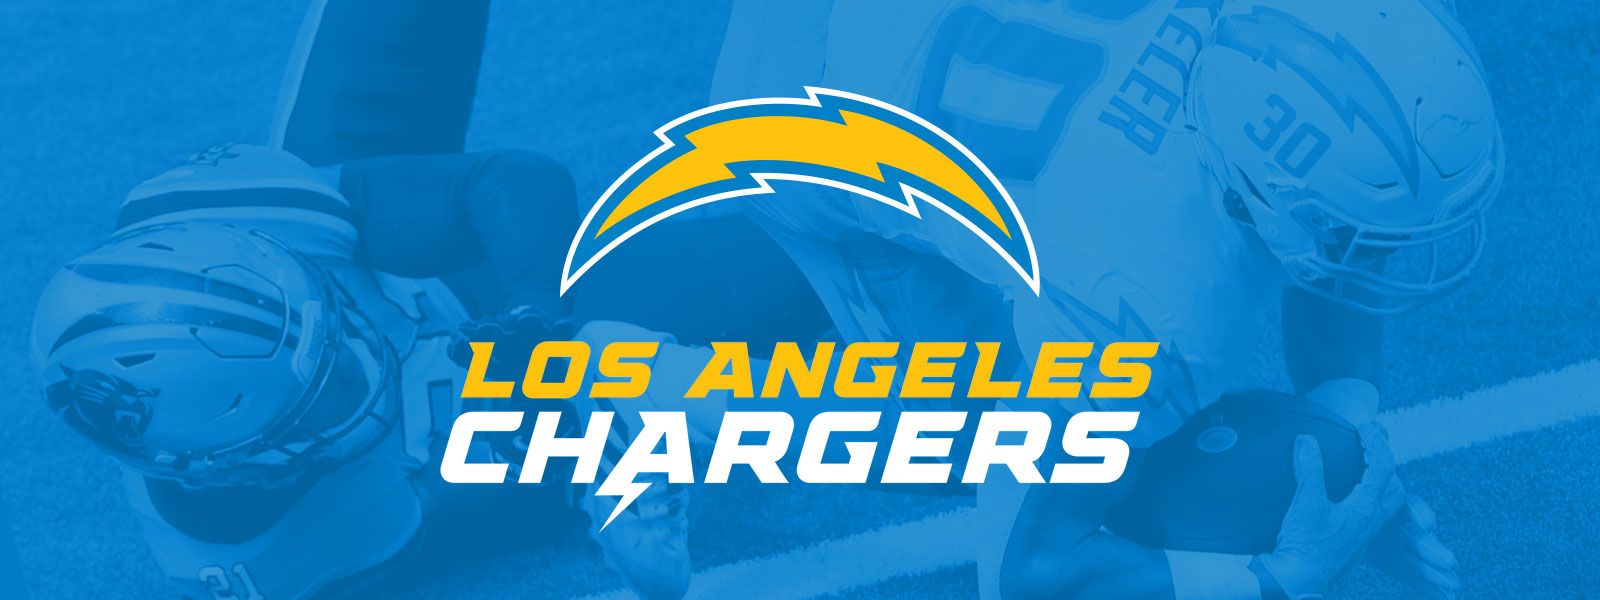 steelers chargers tickets